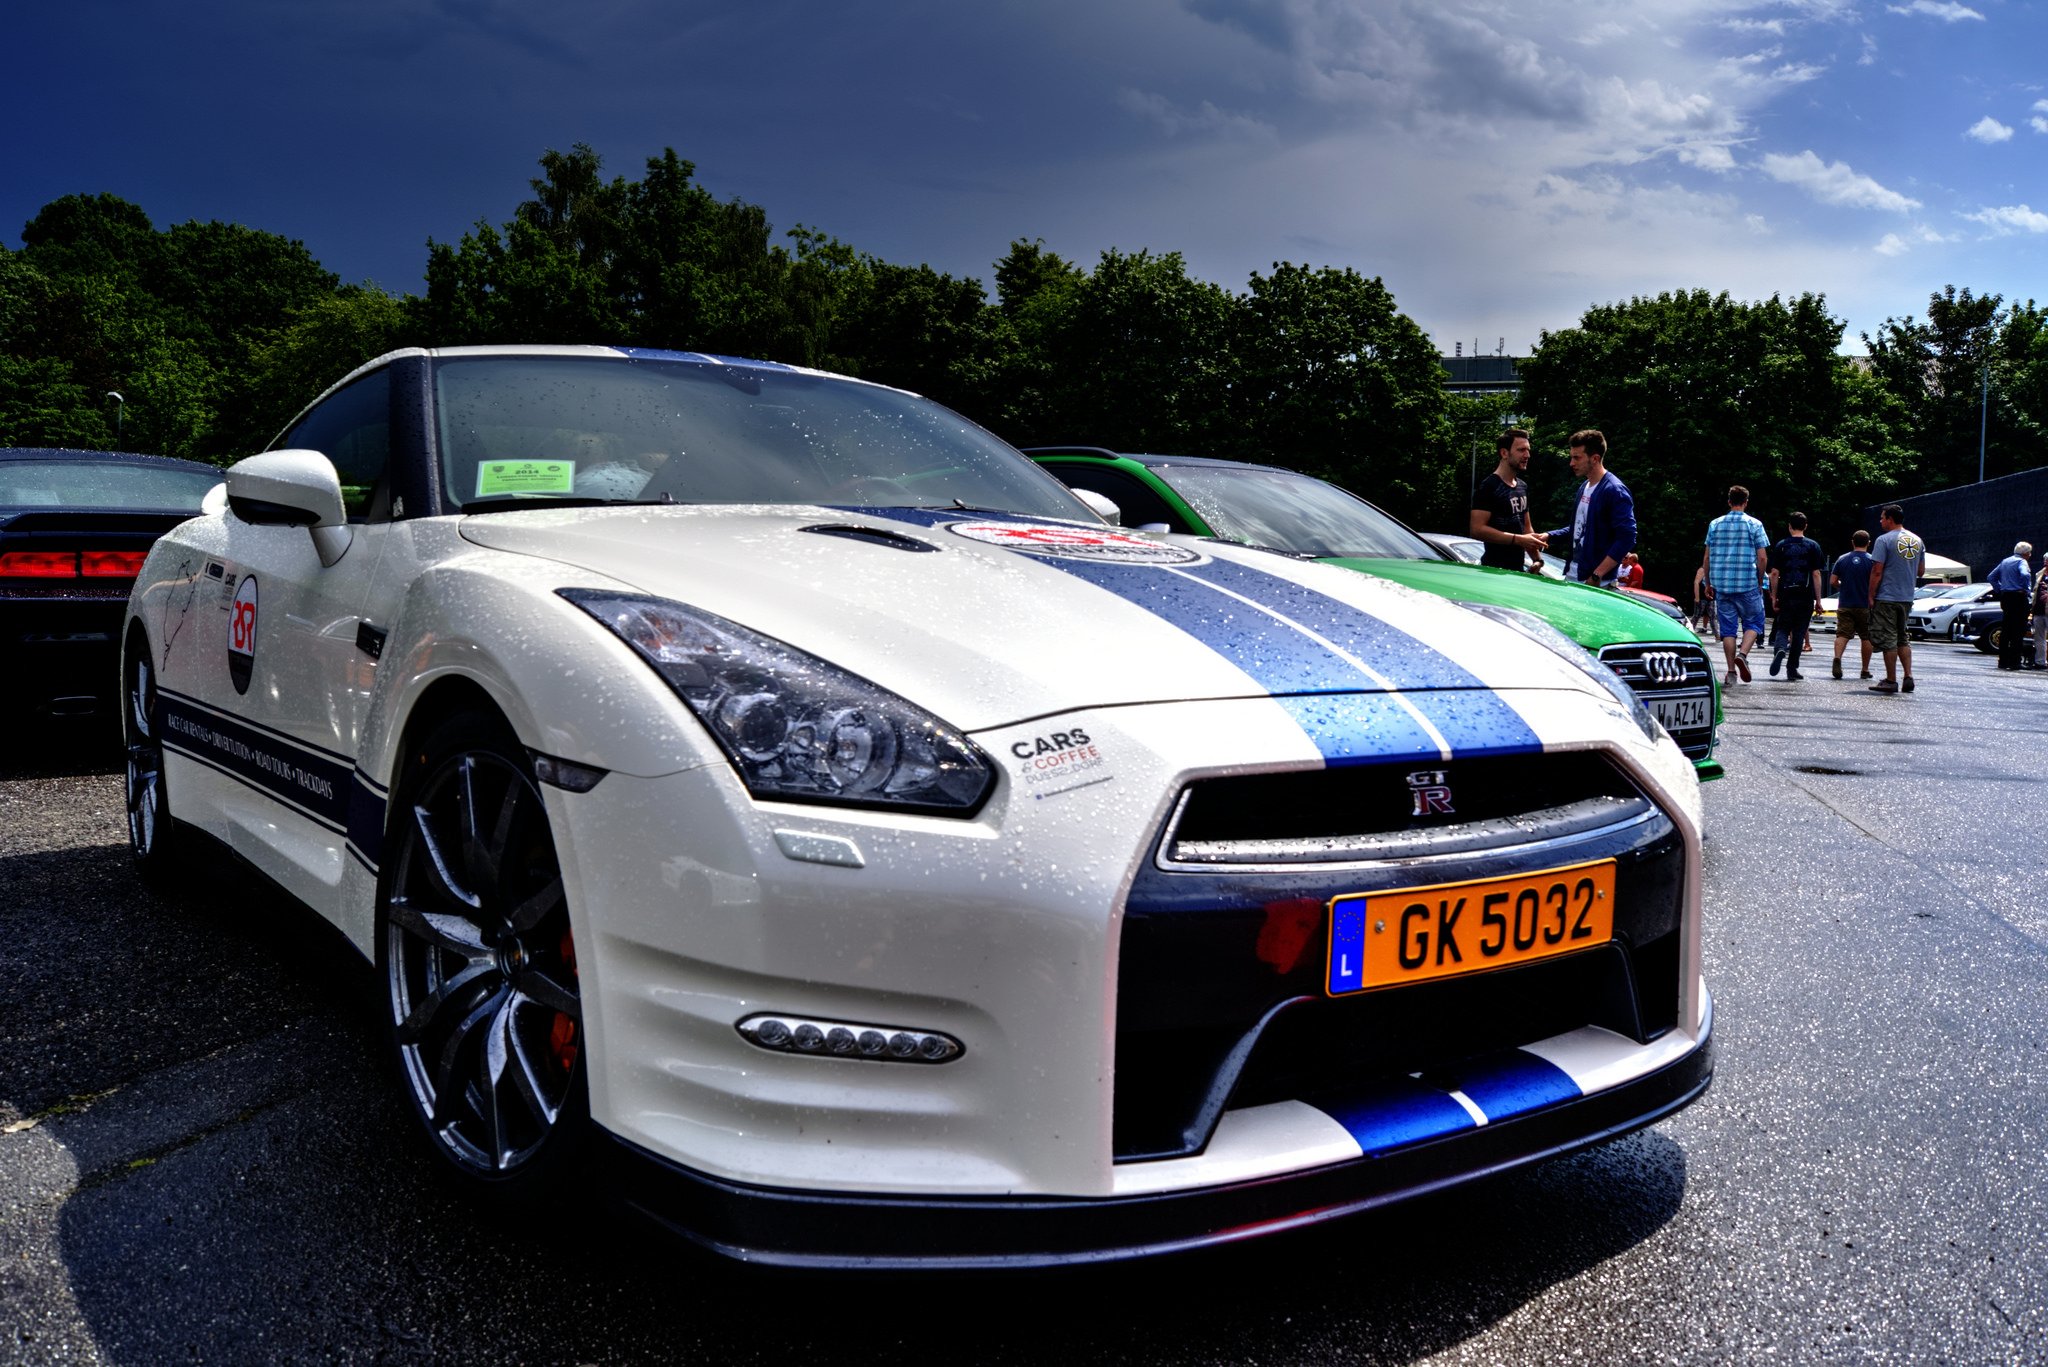 gt r, Nismo, Nissan, R35, Tuning, Supercar, Coupe, Japan